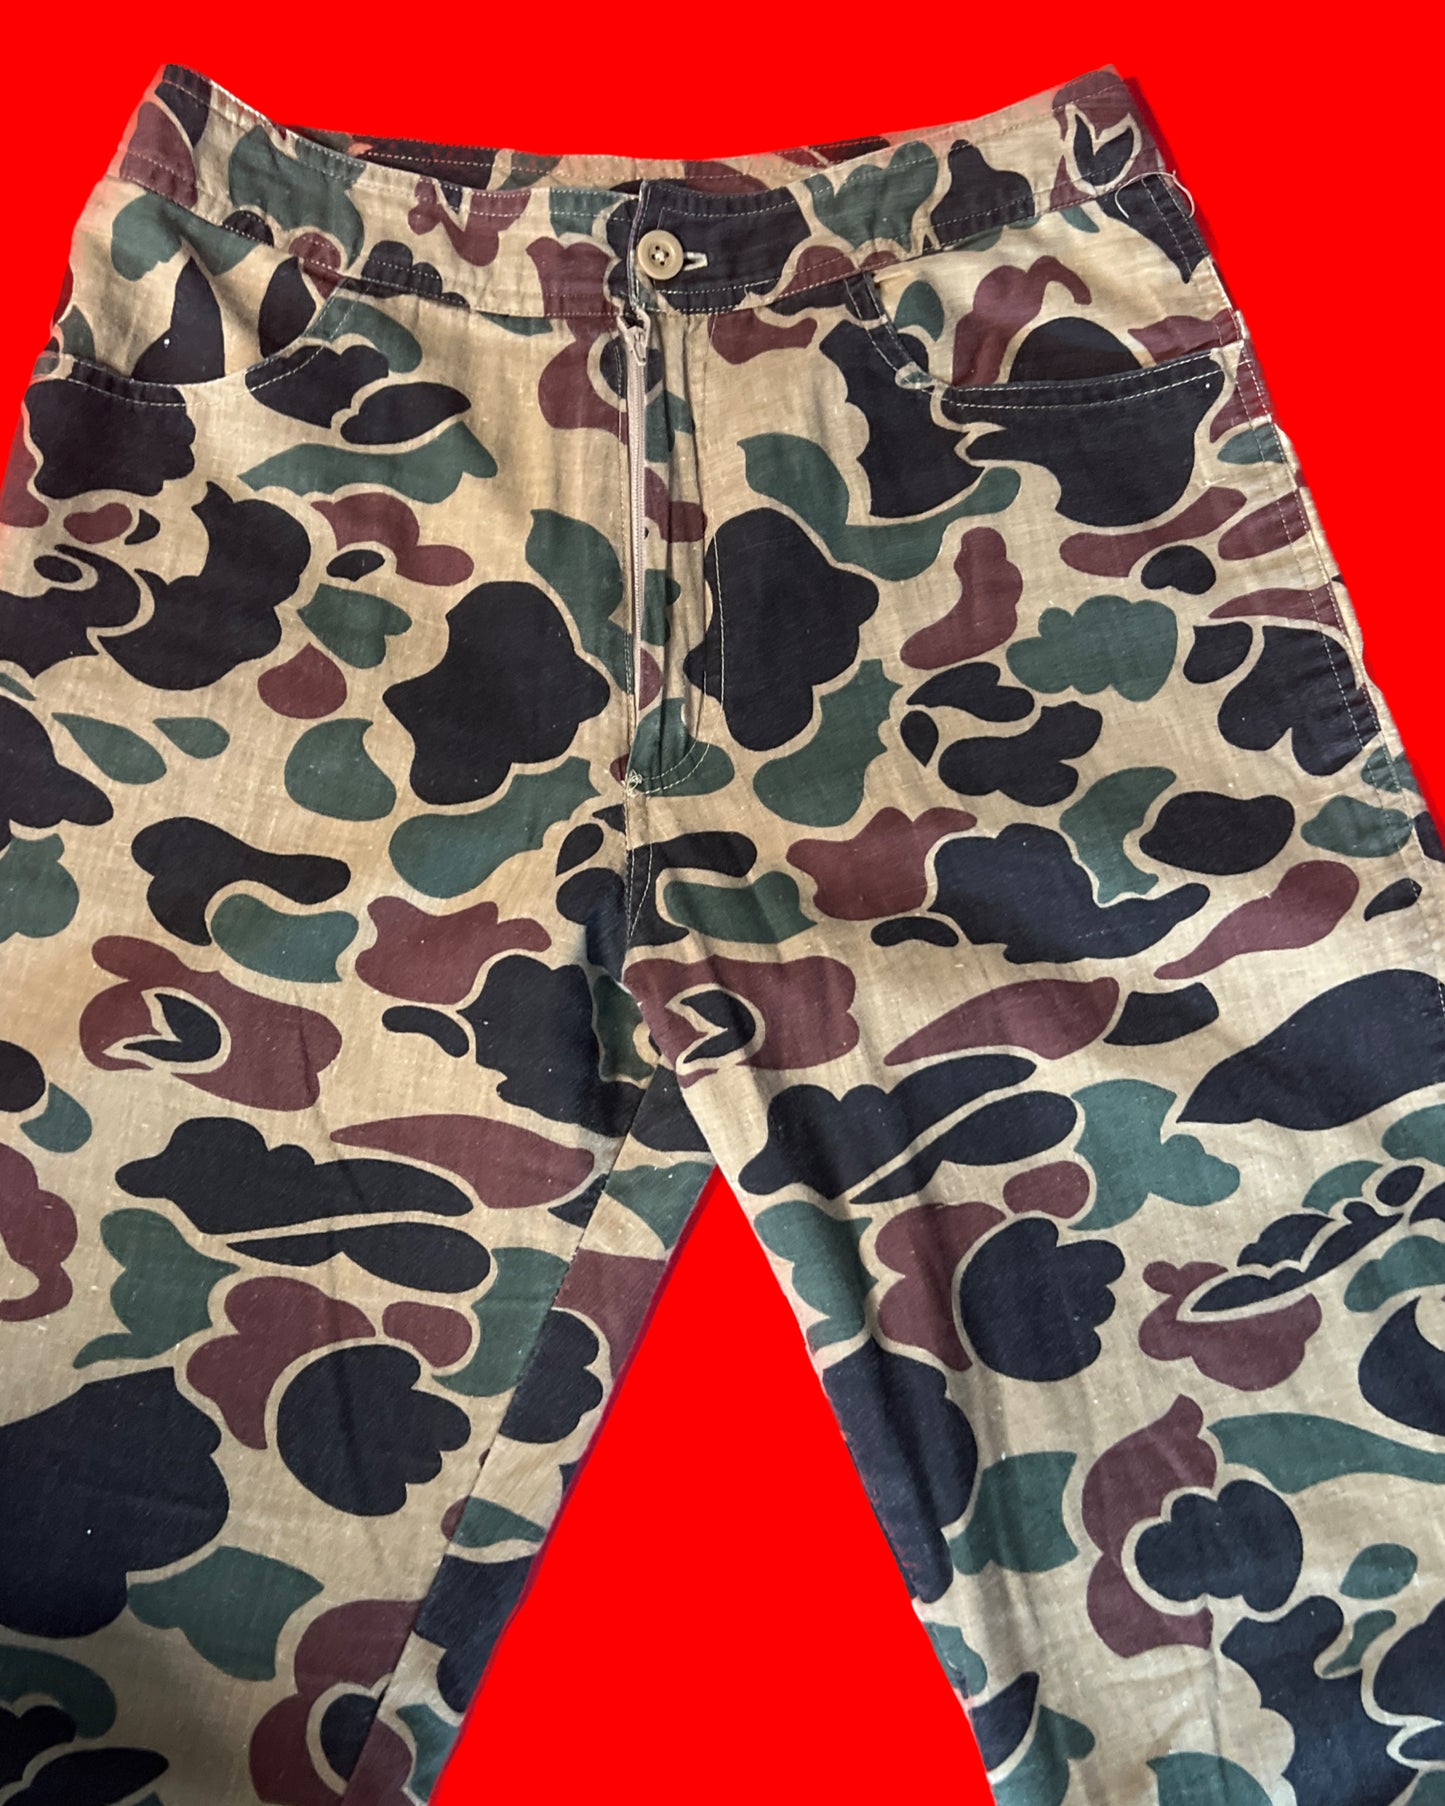 VINTAGE ONE OF A KIND CAMOUFLAGE SUIT